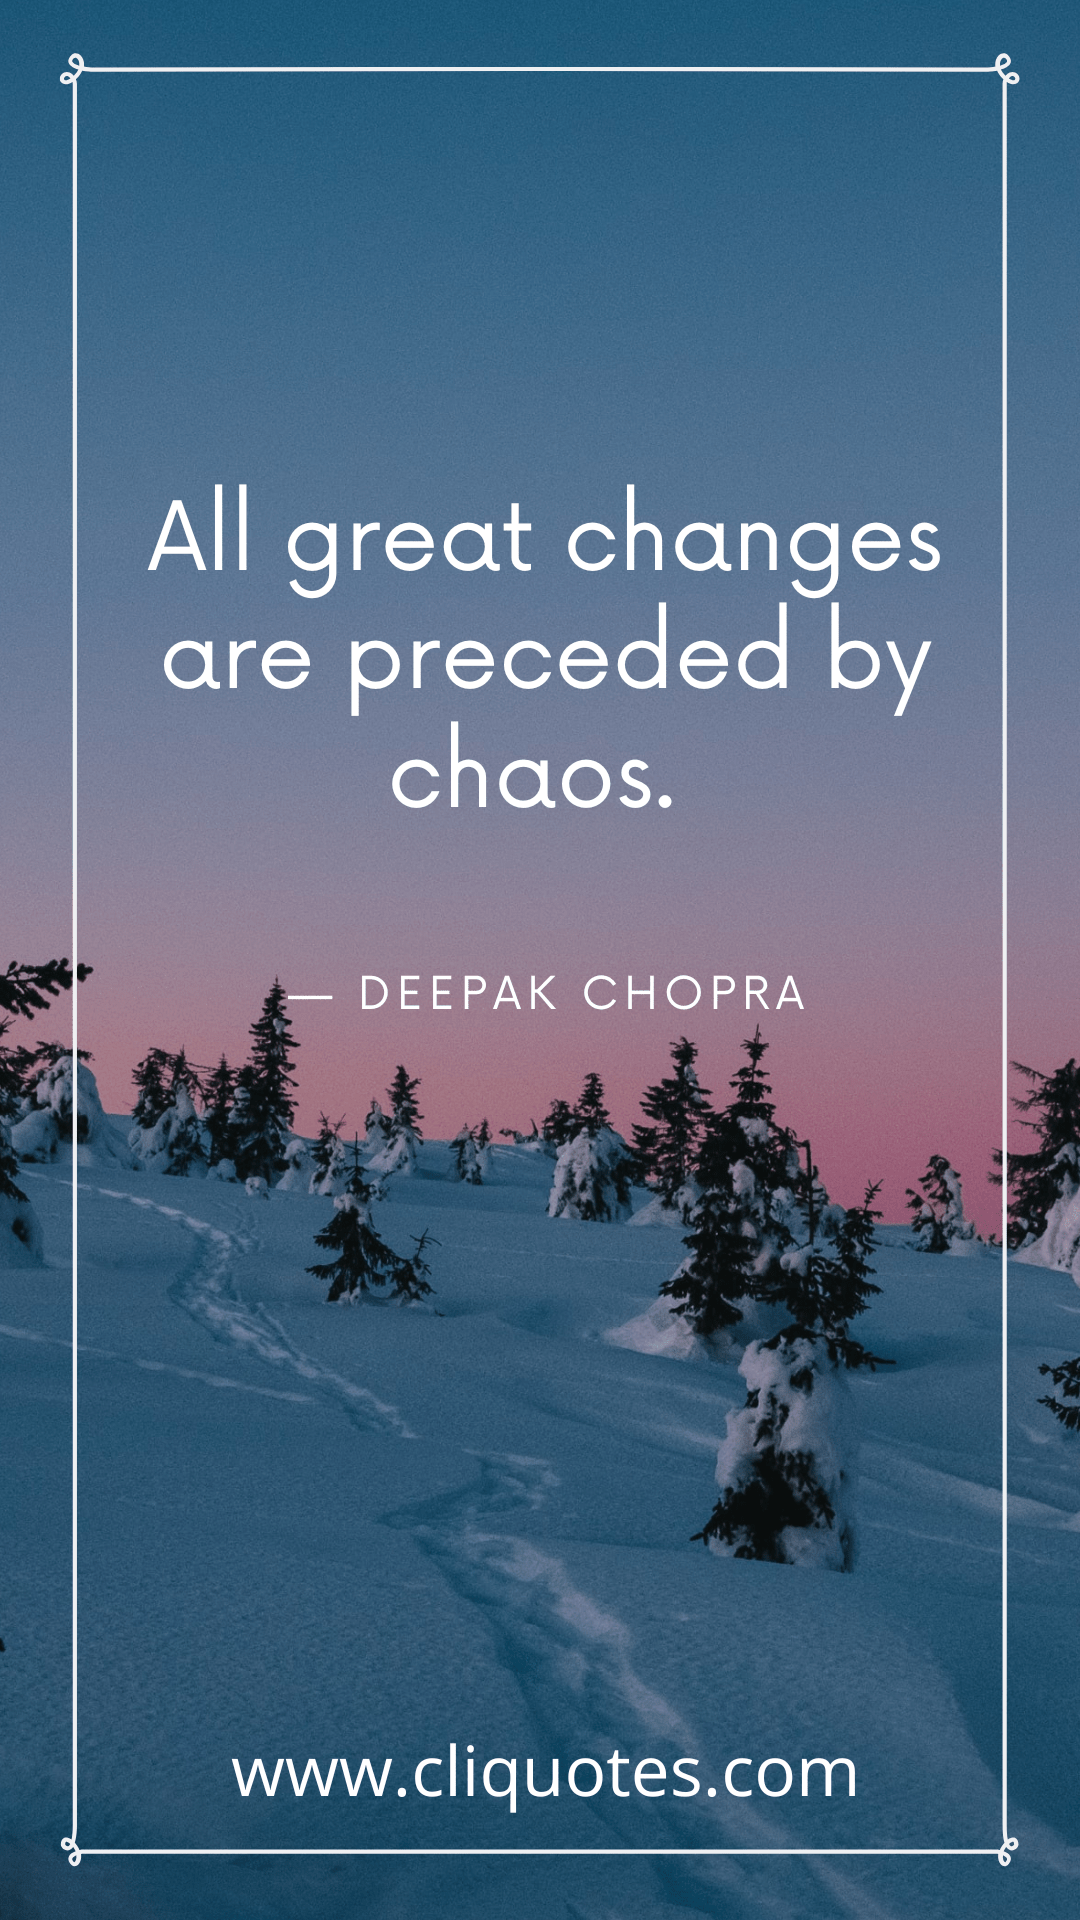 All great changes are preceded by chaos. — DEEPAK CHOPRA